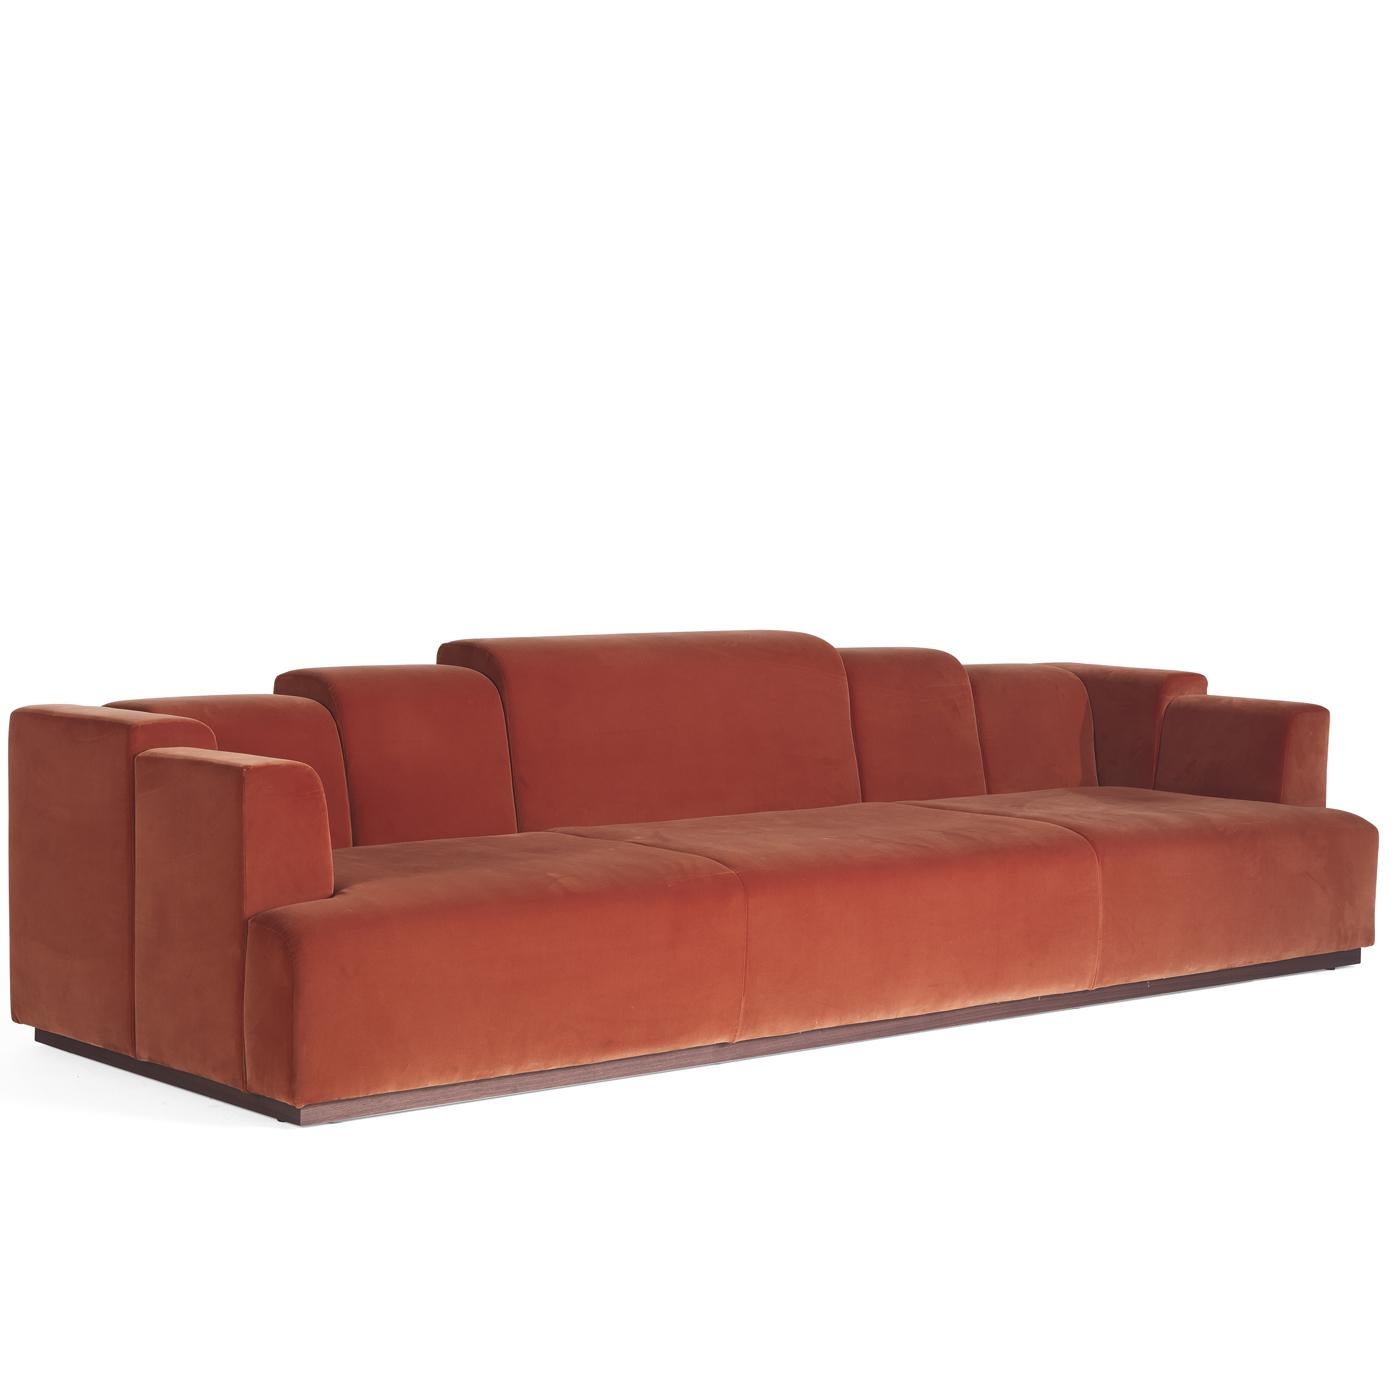 red sofas for sale